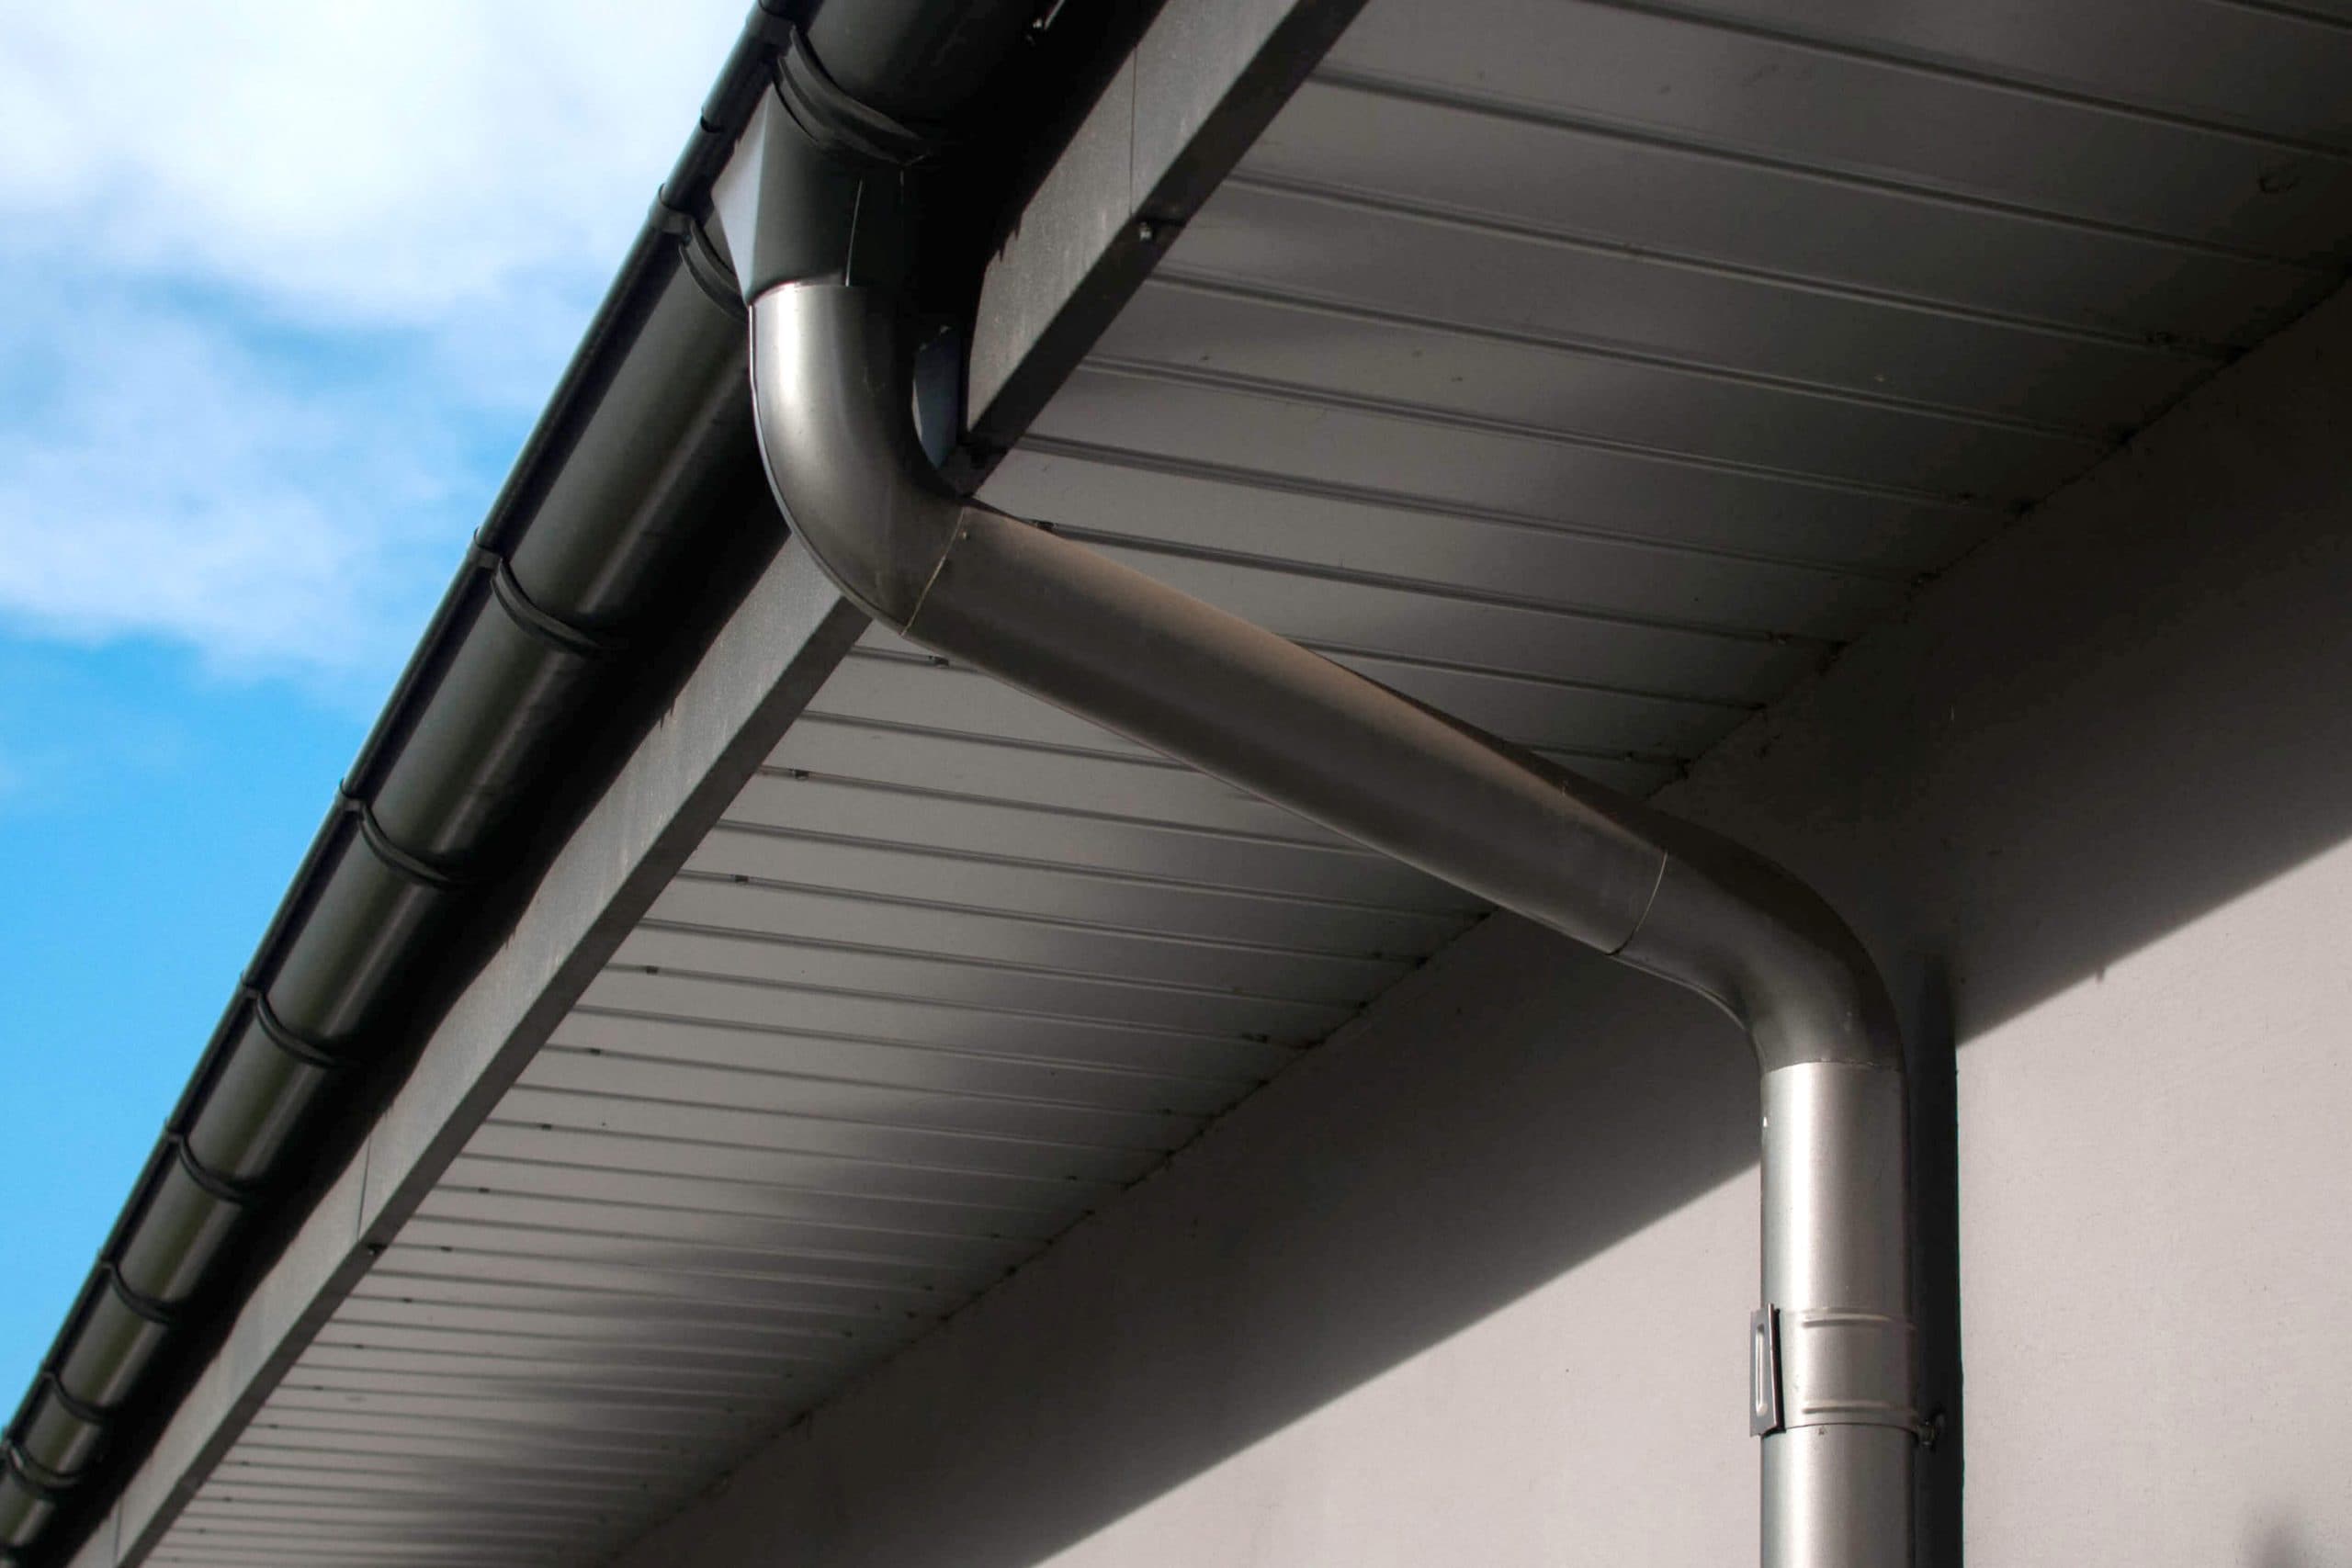 Corrosion-resistant galvanized gutters installed on a commercial building in Shreveport